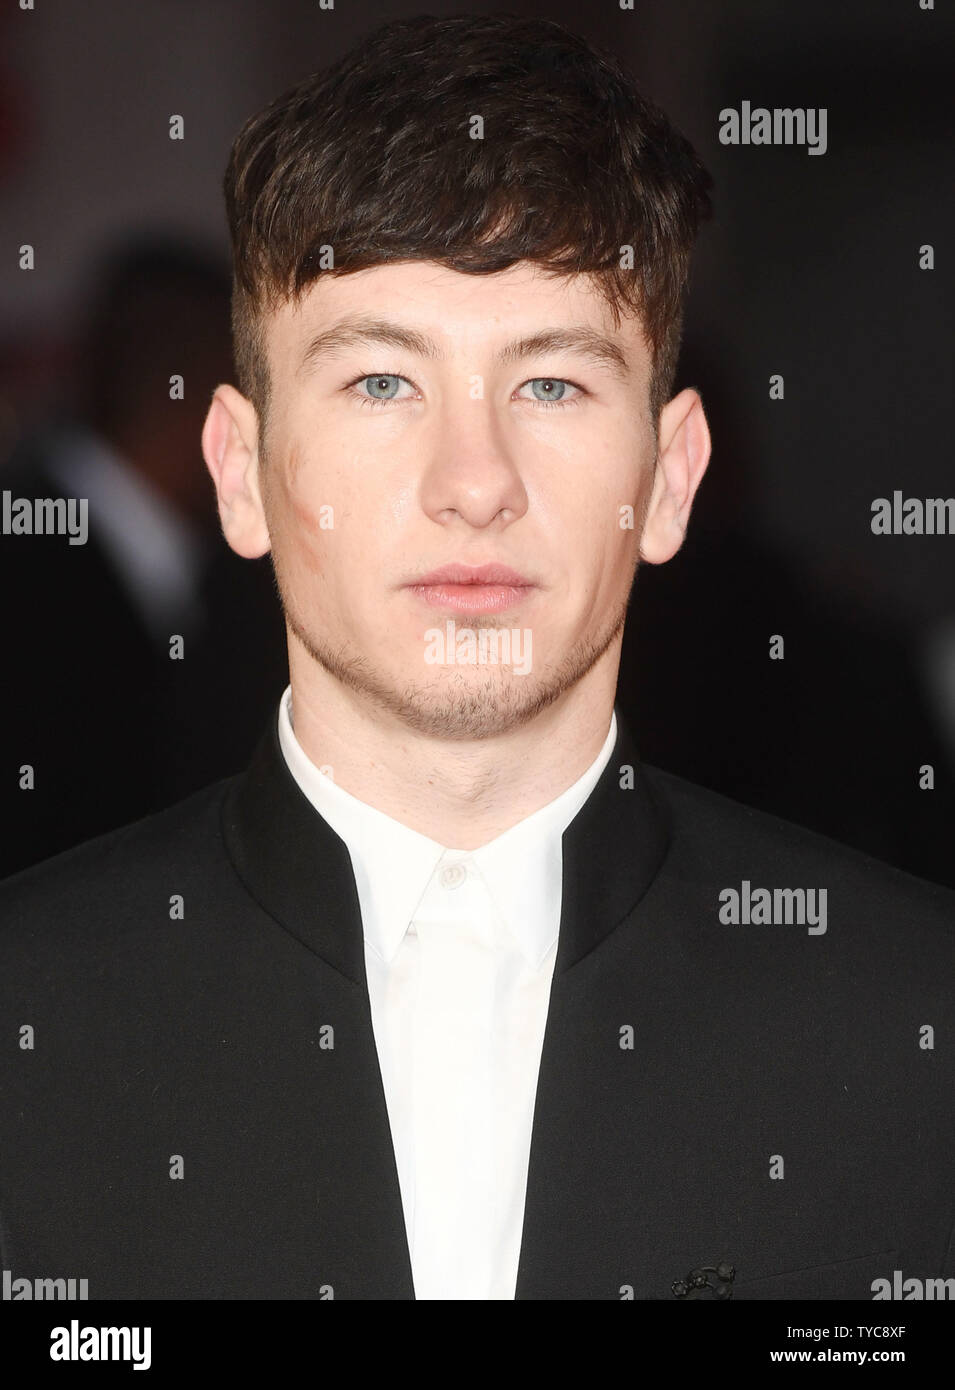 Irish actor Barry Keoghan attends the premiere of Killing Of a Sacred Deer during the BFI London Film Festtival in London on October 12, 2017. Photo by Rune Hellestad/ UPI Stock Photo